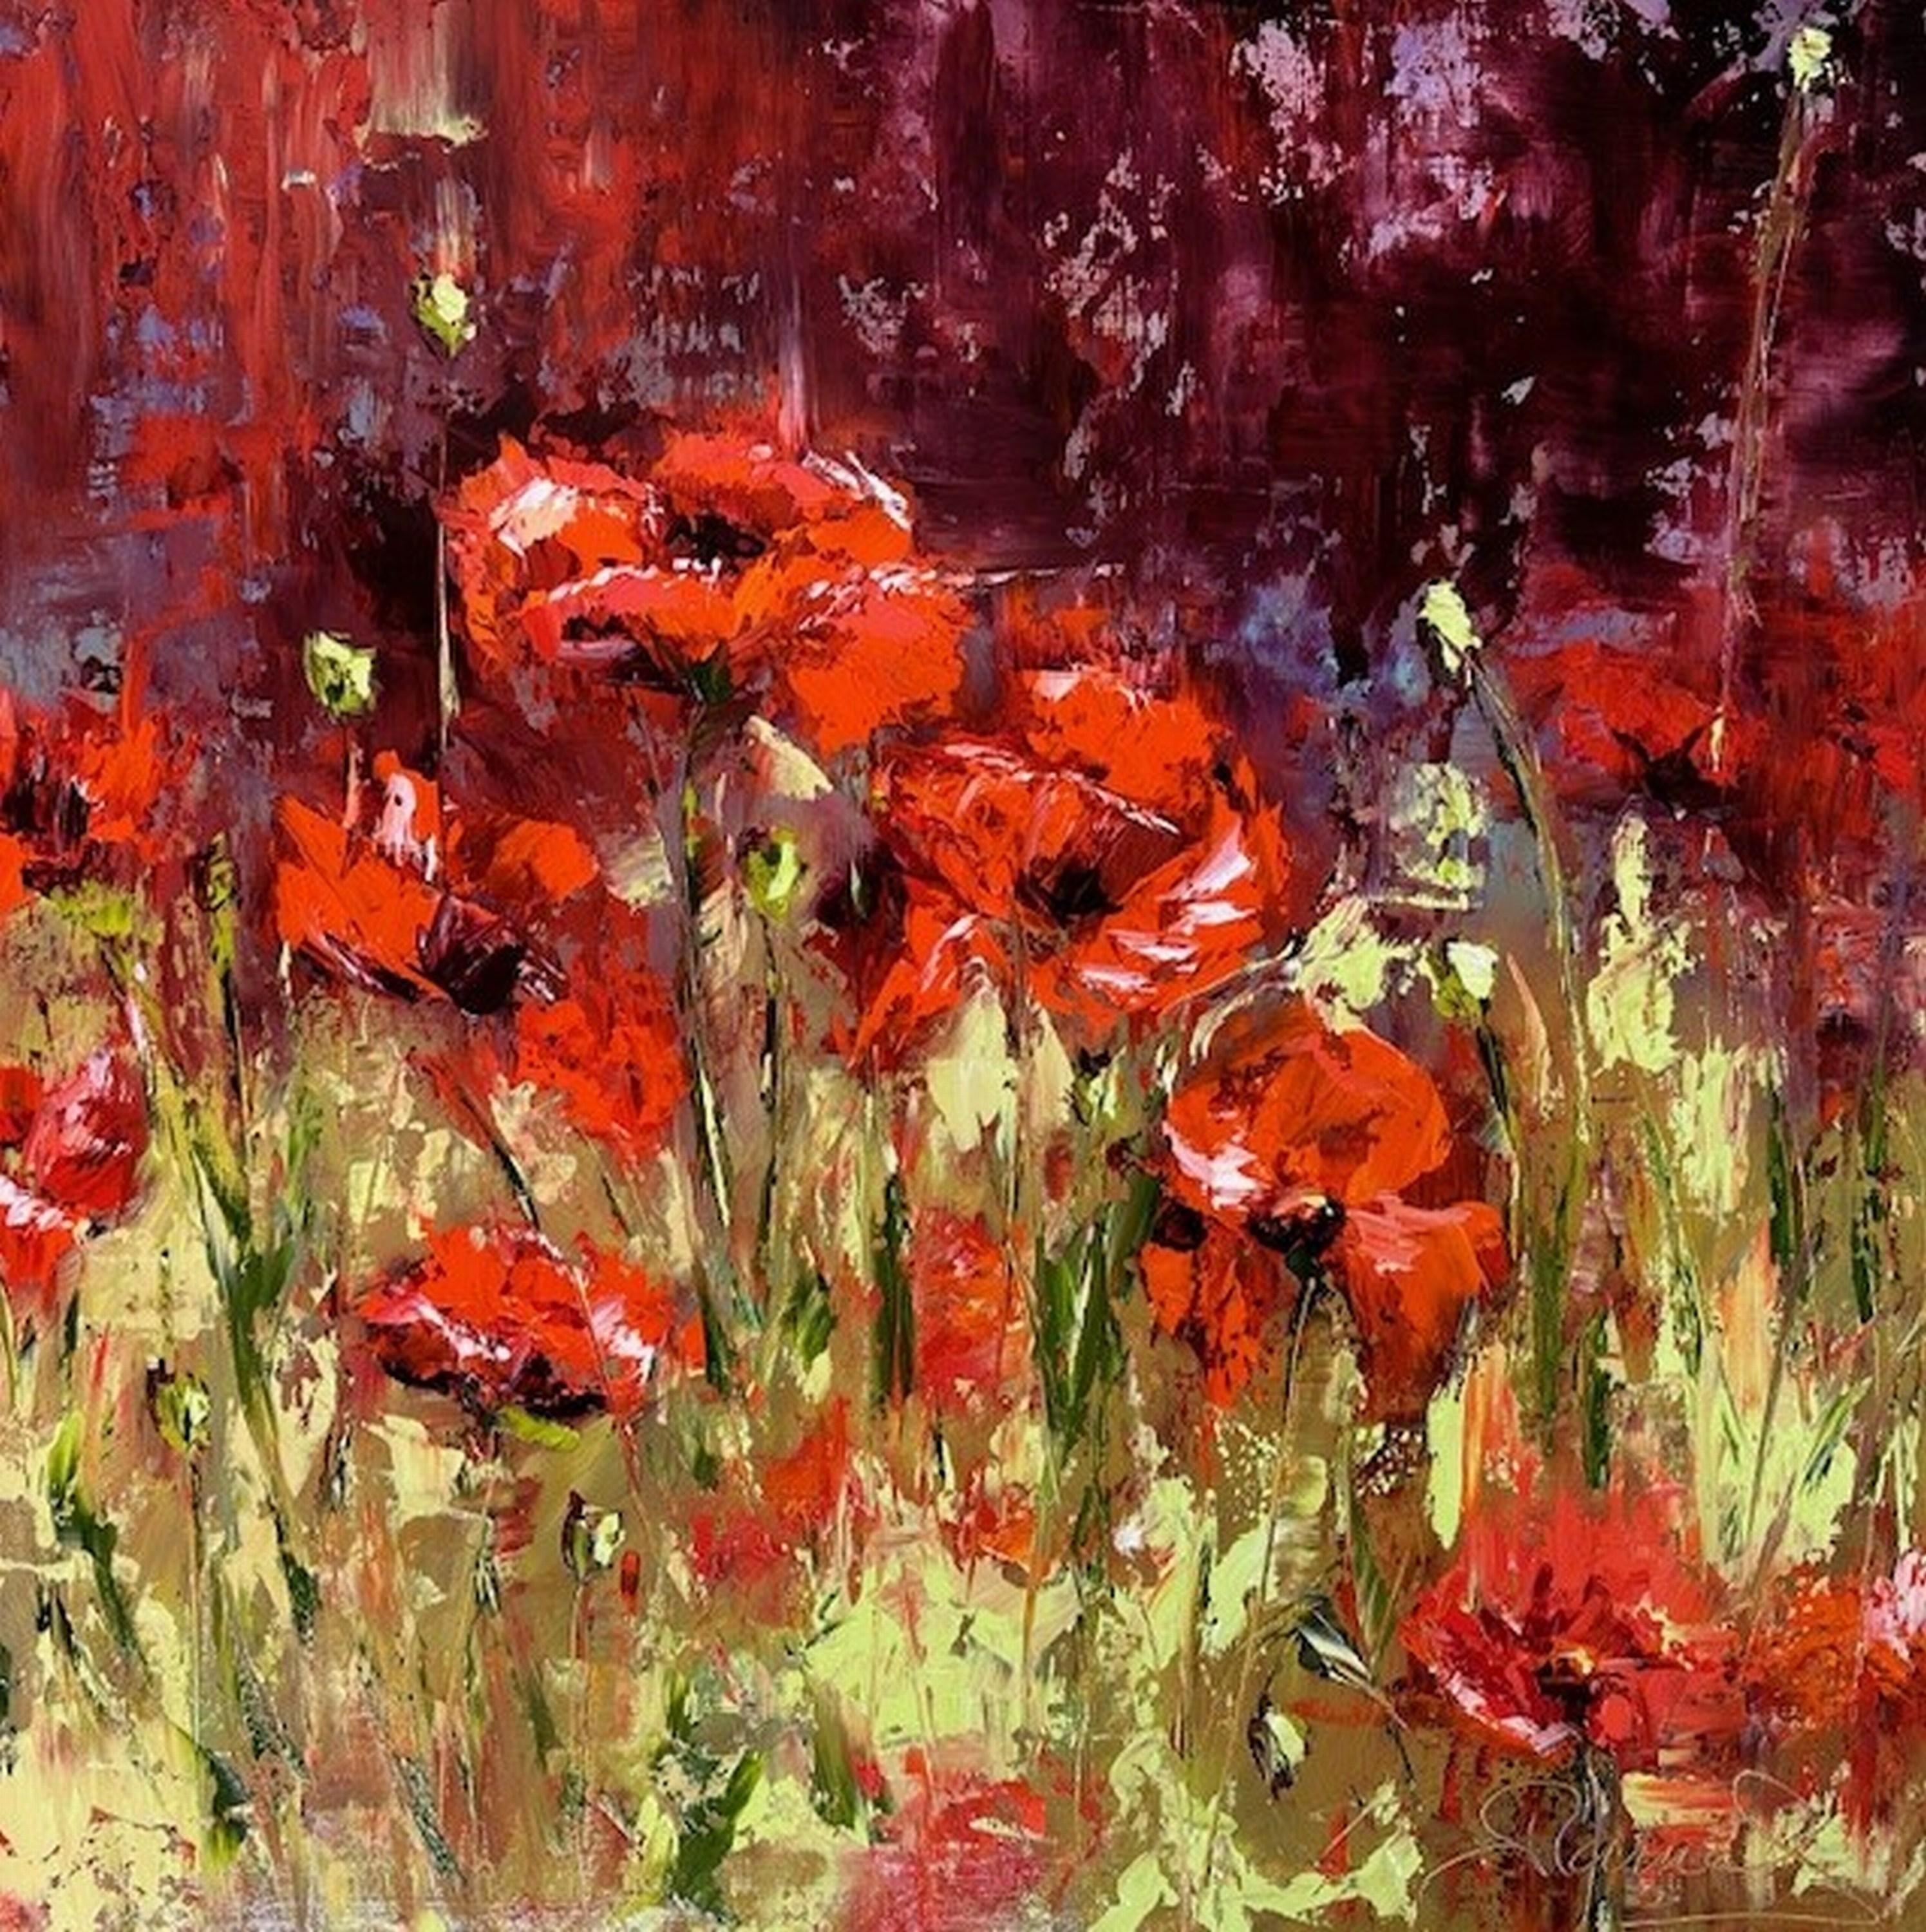 Beauty in Red
Red Poppies
Oil on Wood Panel
Year: 2024
Size: 24 x 24 x 1.625 inches
Signed by hand
COA provided
Ref.: 924802-2087

A beautiful Impressionist rendering of a field of red poppies thirsty for light. The sun caresses the soft leaves and